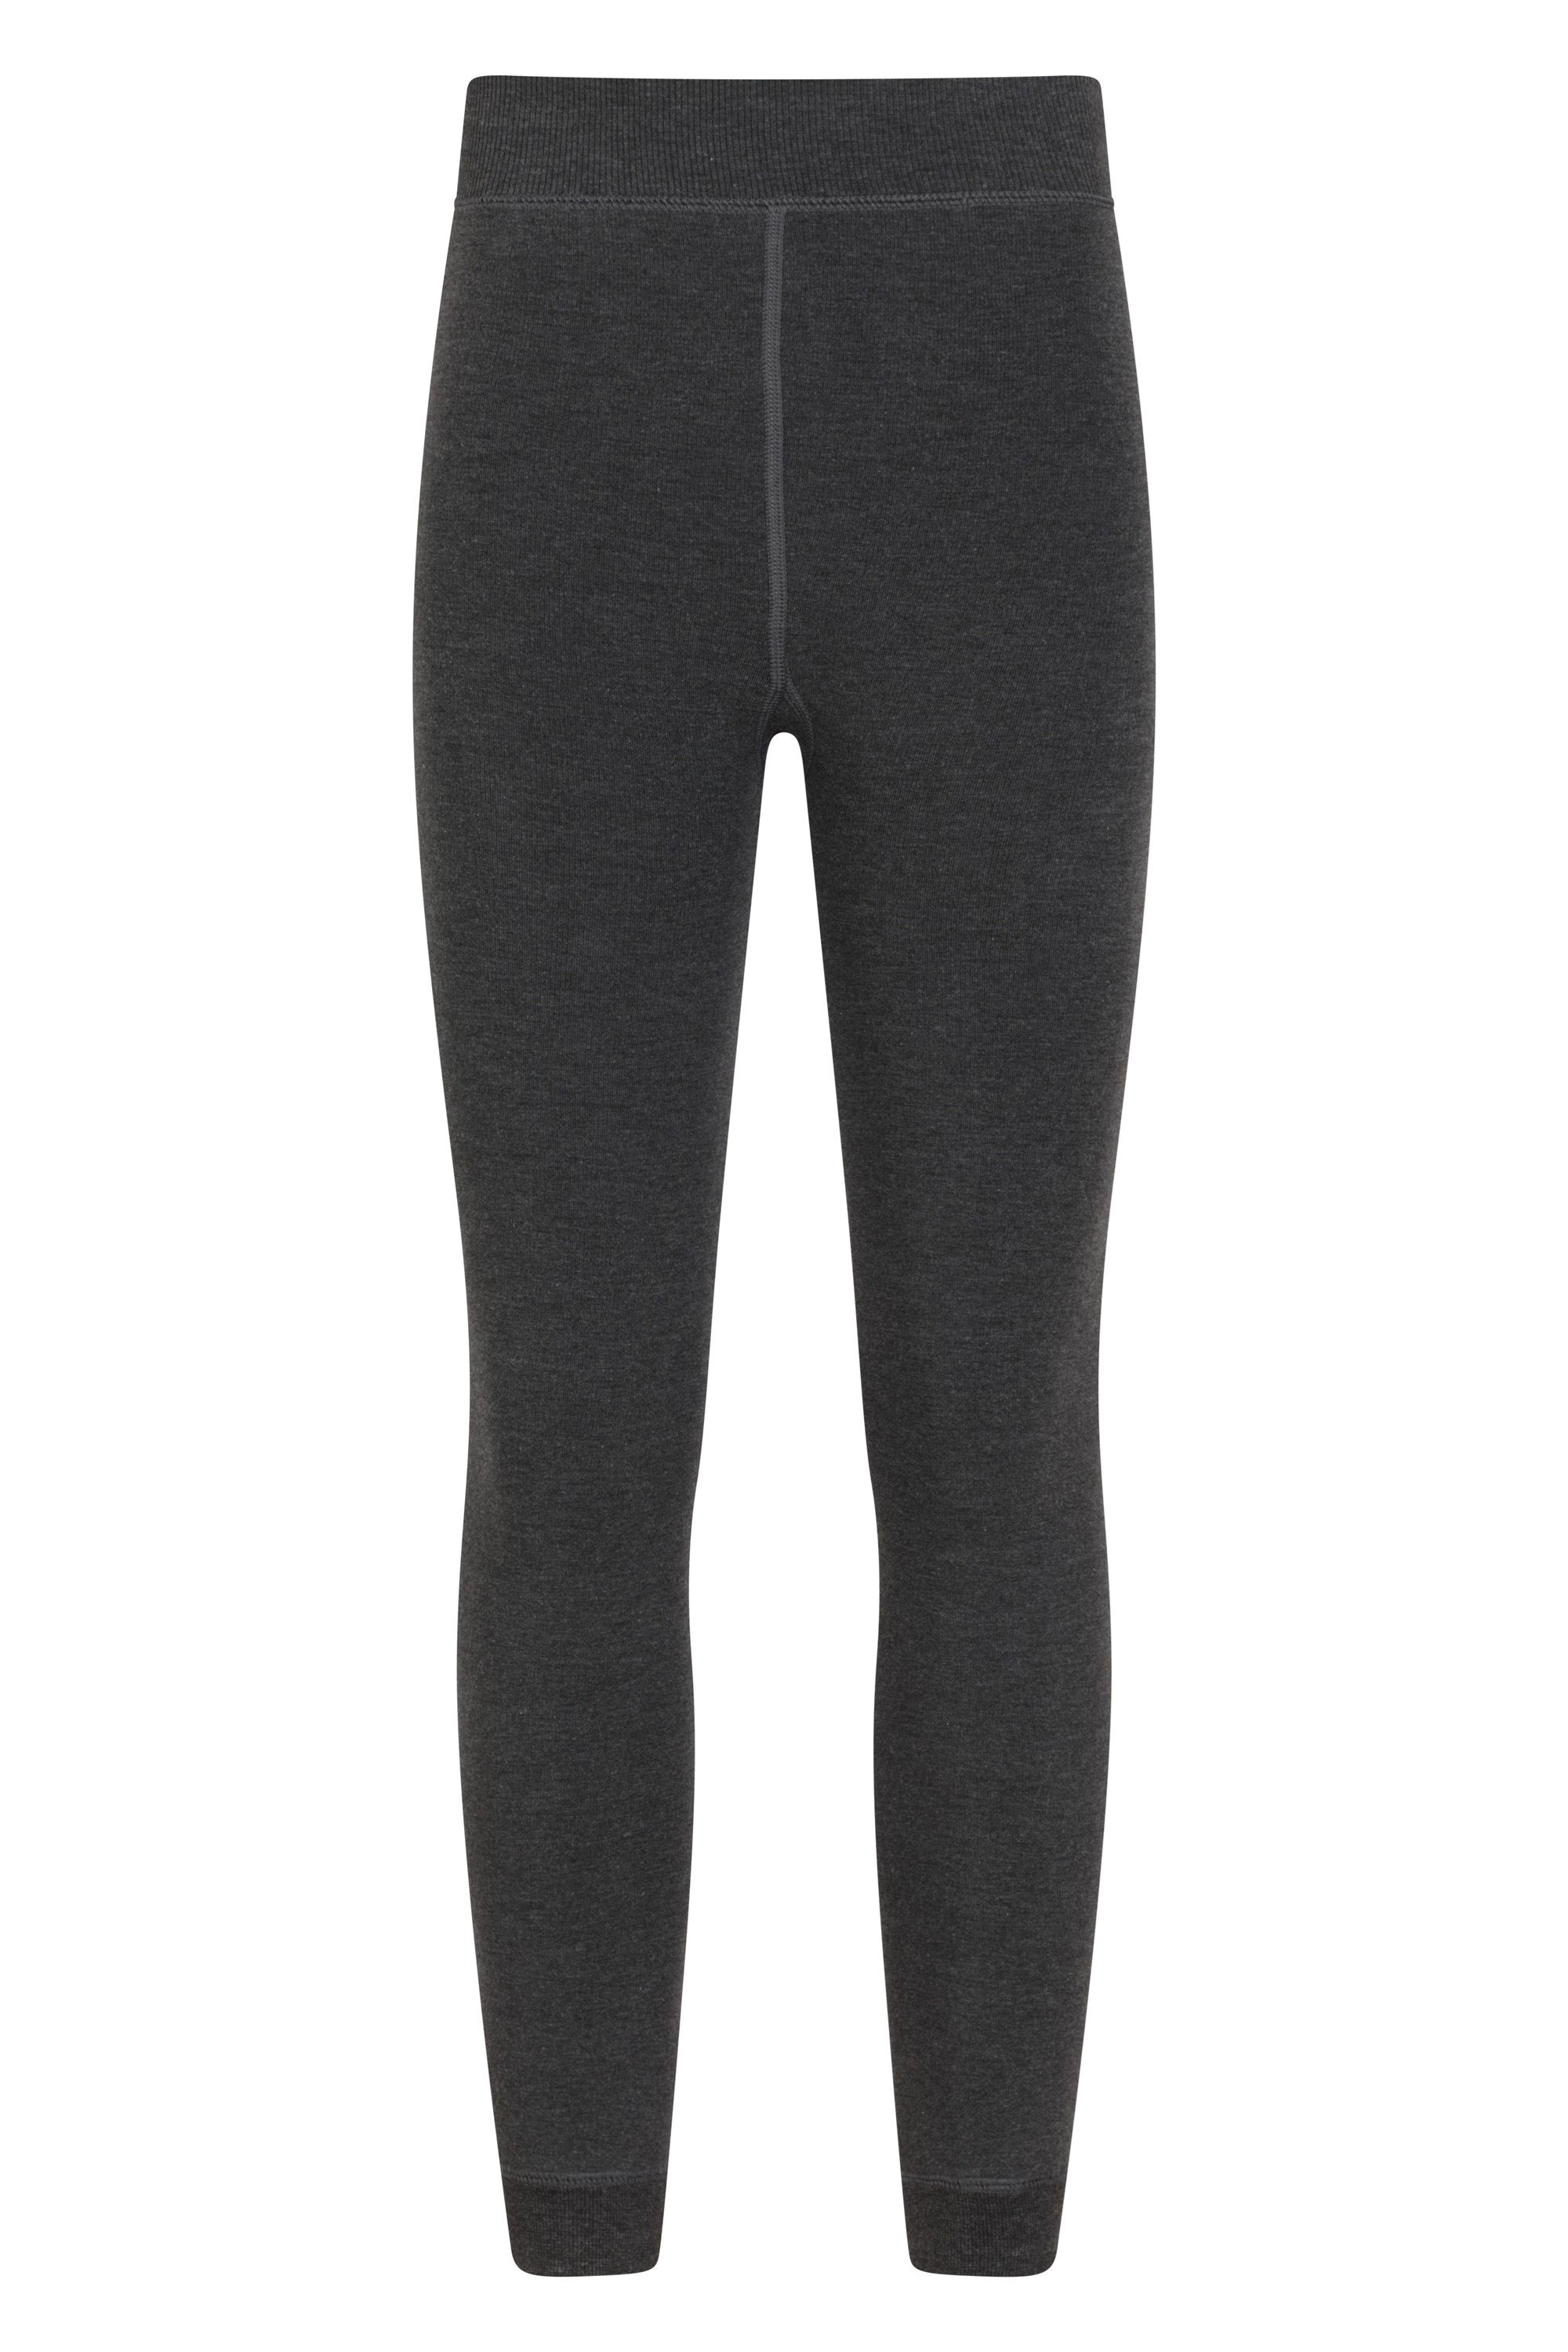 Mountain Warehouse IsoTherm Womens Brushed Thermal Leggings RM7